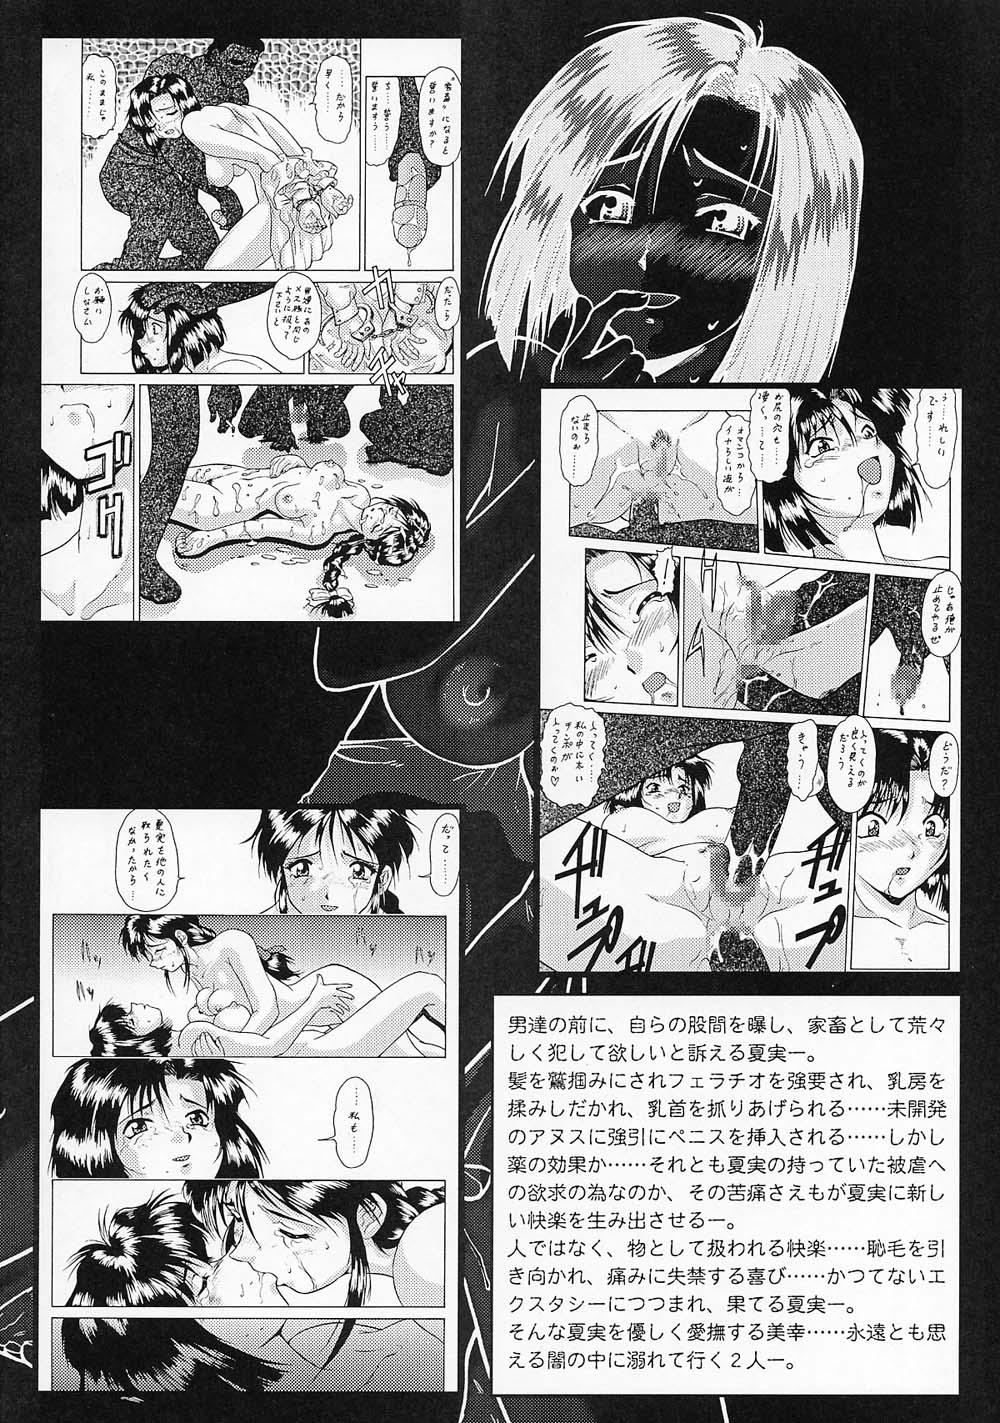 Interacial Taiho Shichauzo The Doujin Vol. 3 - Youre under arrest Gym - Page 8